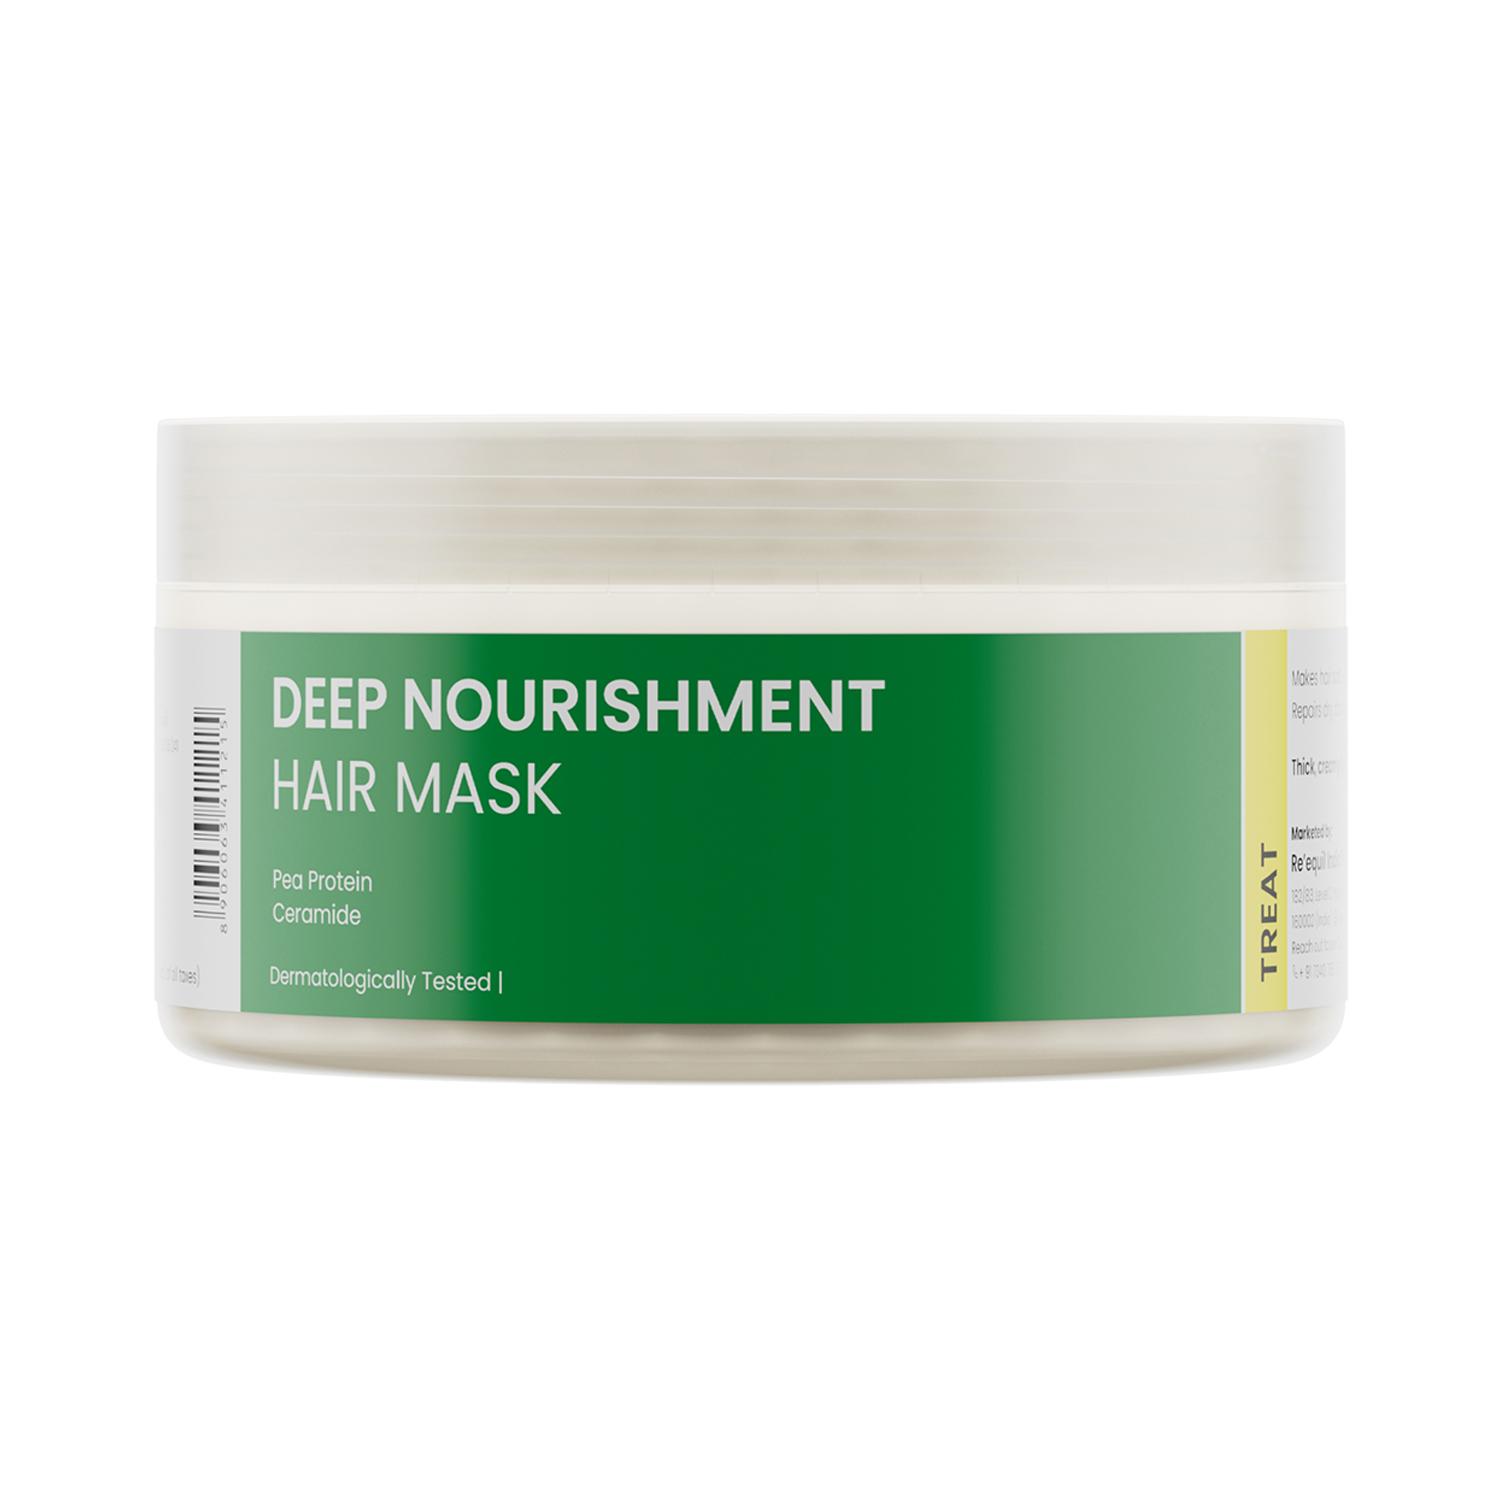 Re'equil | Re'equil Pea Protein & Ceramide Hair Mask (200g)